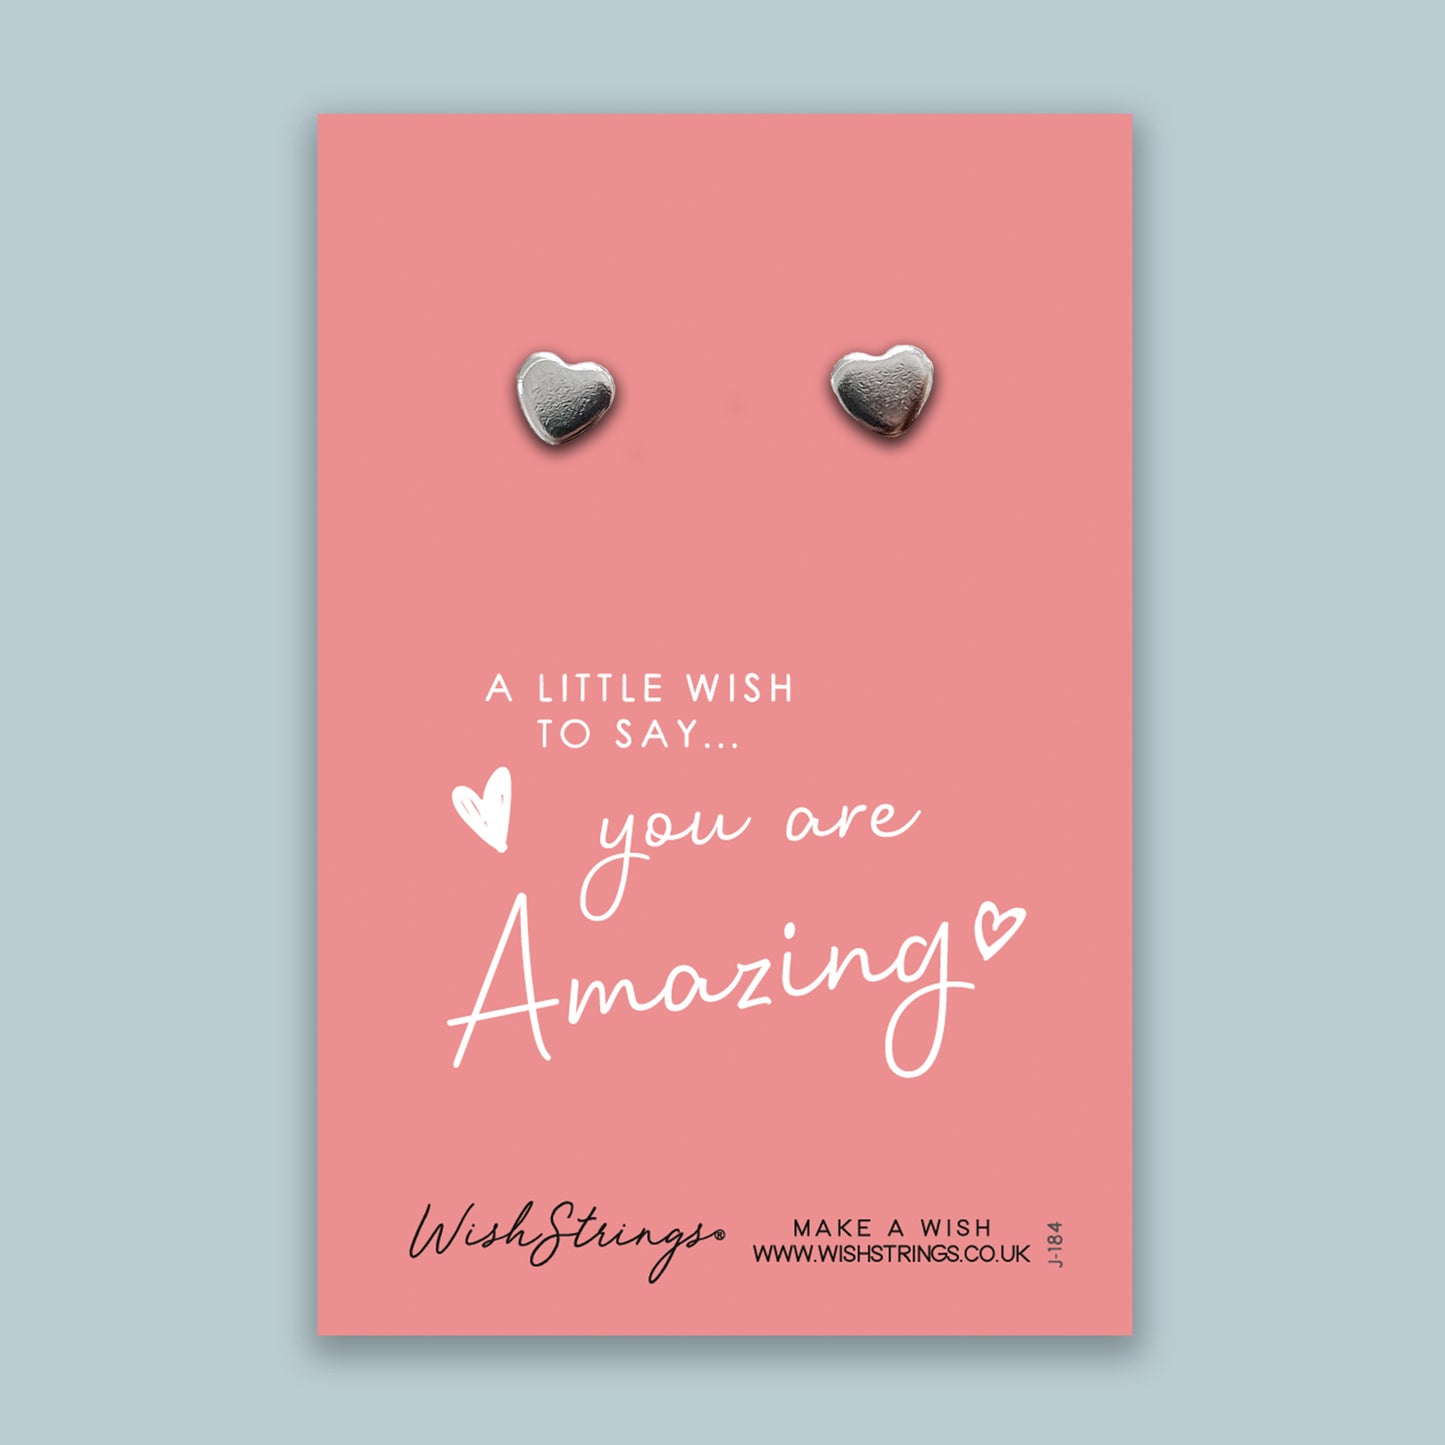 You are Amazing - Silver Heart Stud Earrings | 304 Stainless - Hypoallergenic